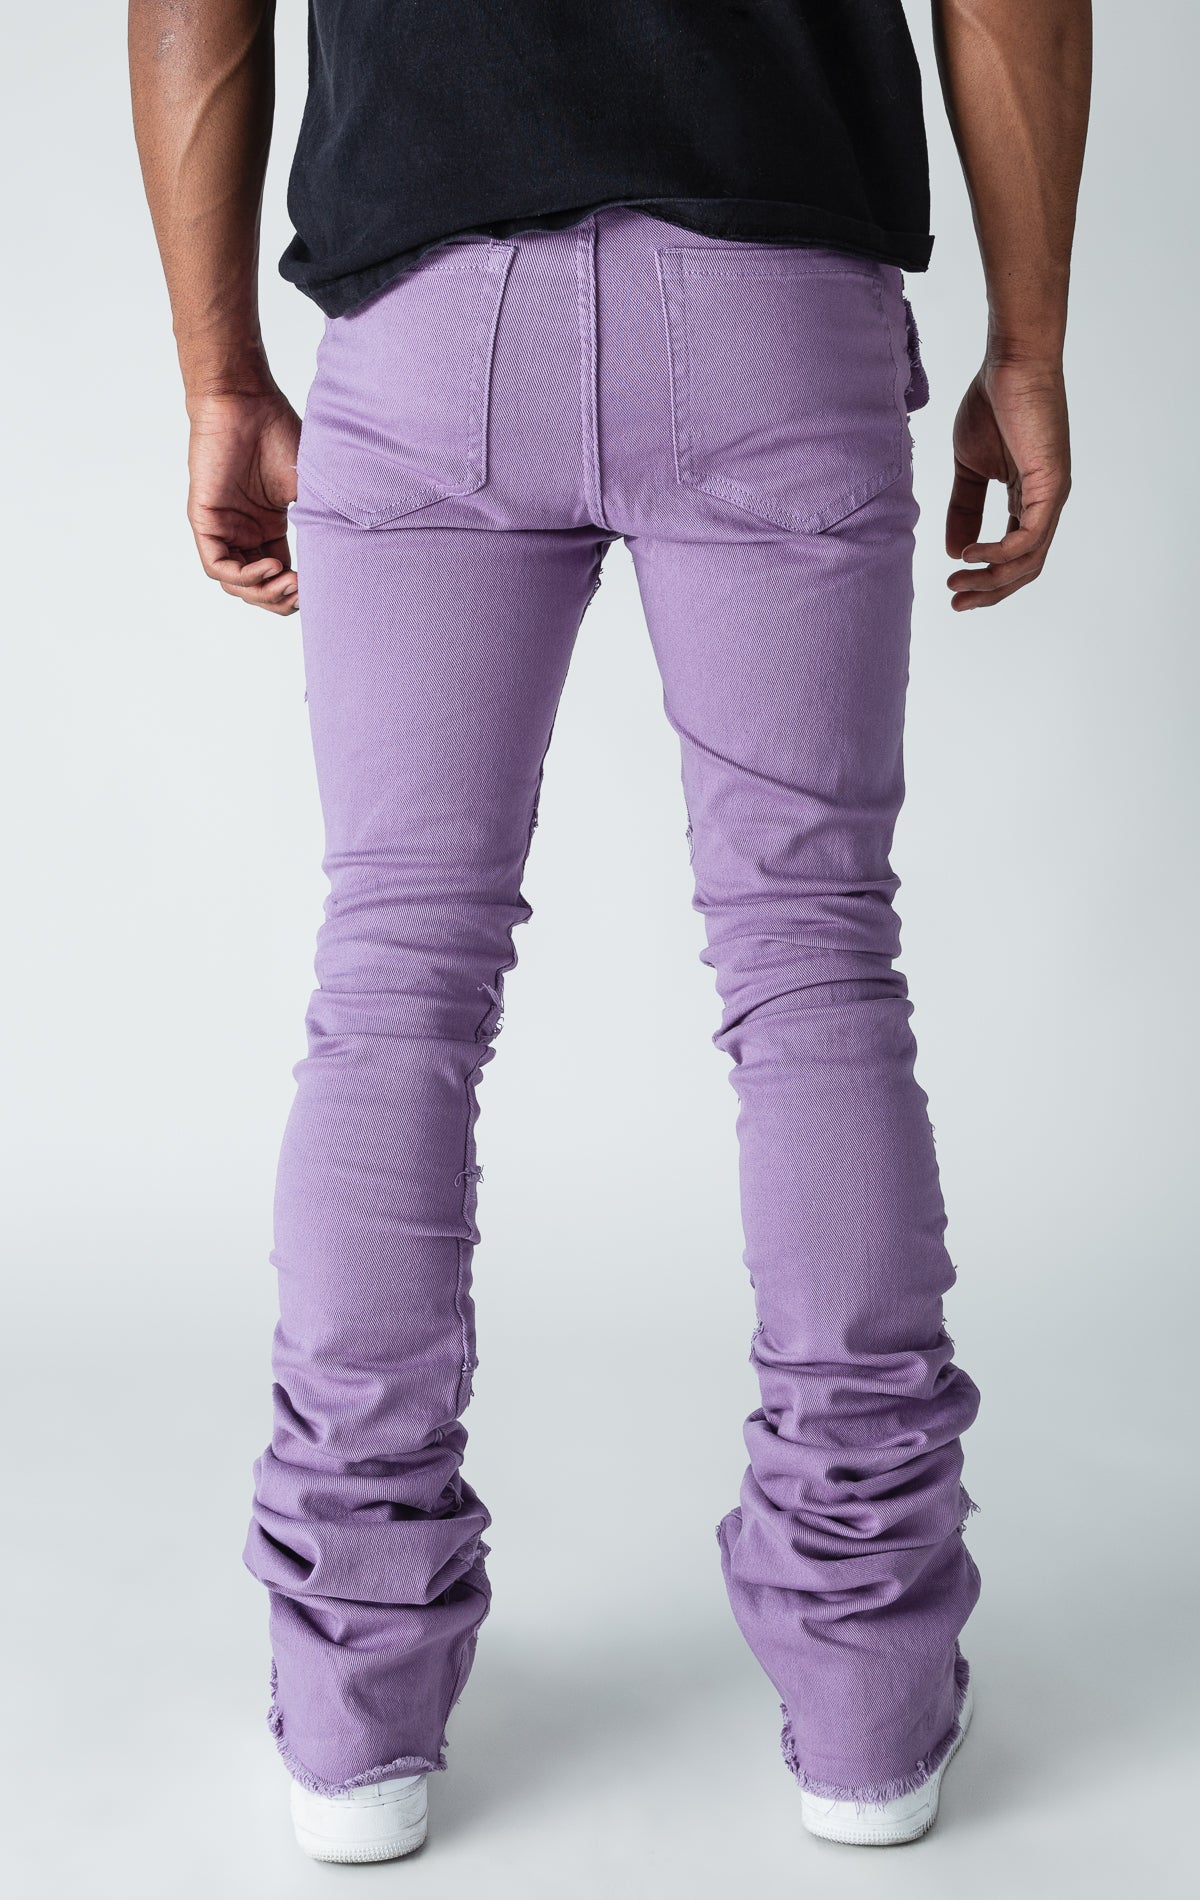 Purple patterned stitched, flared denim stacked jeans.